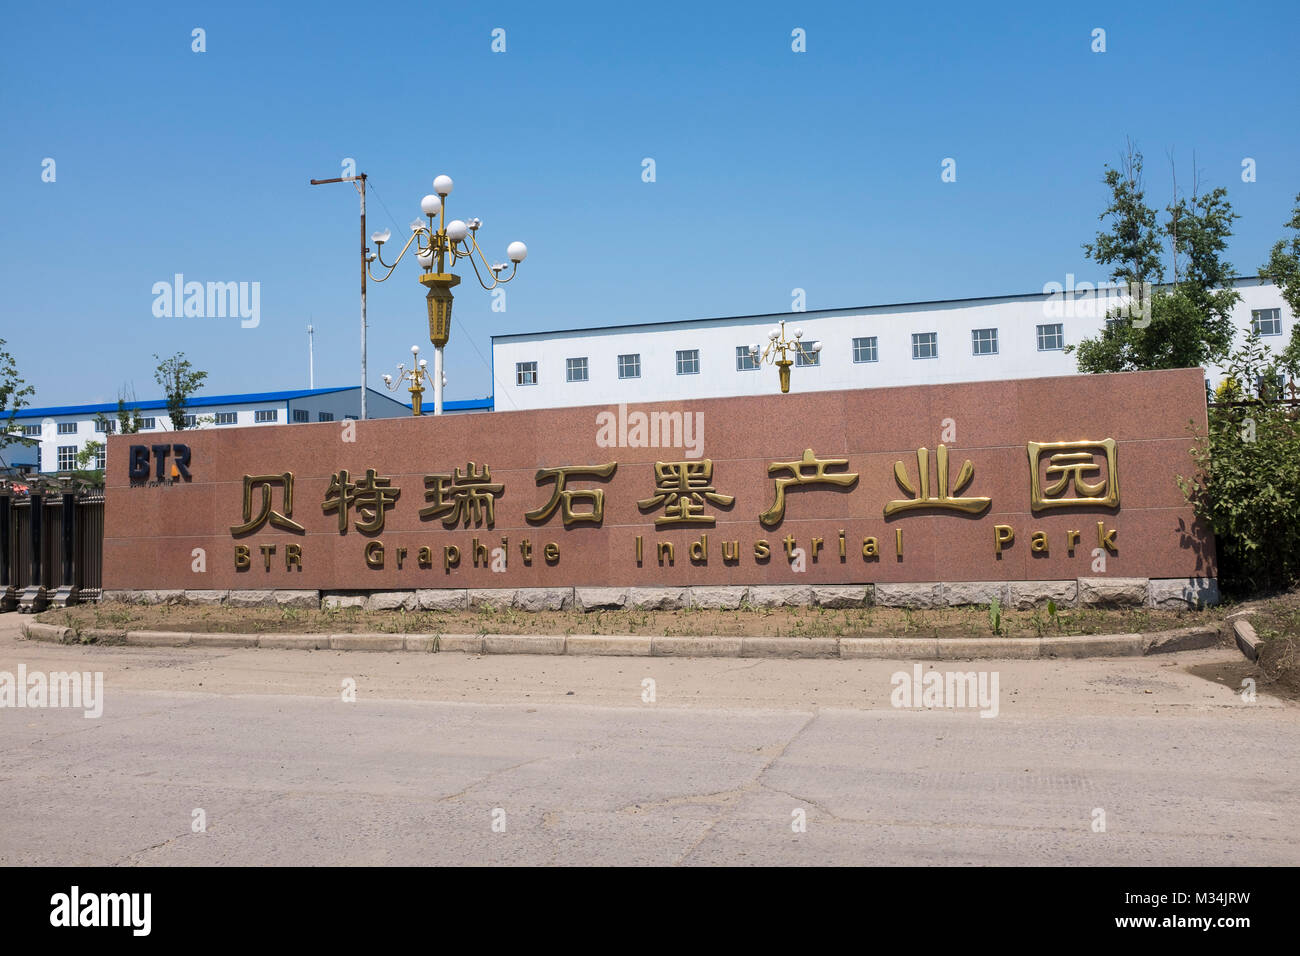 Jixi, Heilongjiang, China. 4th July, 2017. Entrance of BTR Graphite Industrial Park. BTR is the world's largest supplier of graphite, which is in increasing demand due to its key role in battery production. Credit: Dave Tacon/ZUMA Wire/ZUMAPRESS.com/Alamy Live News Stock Photo